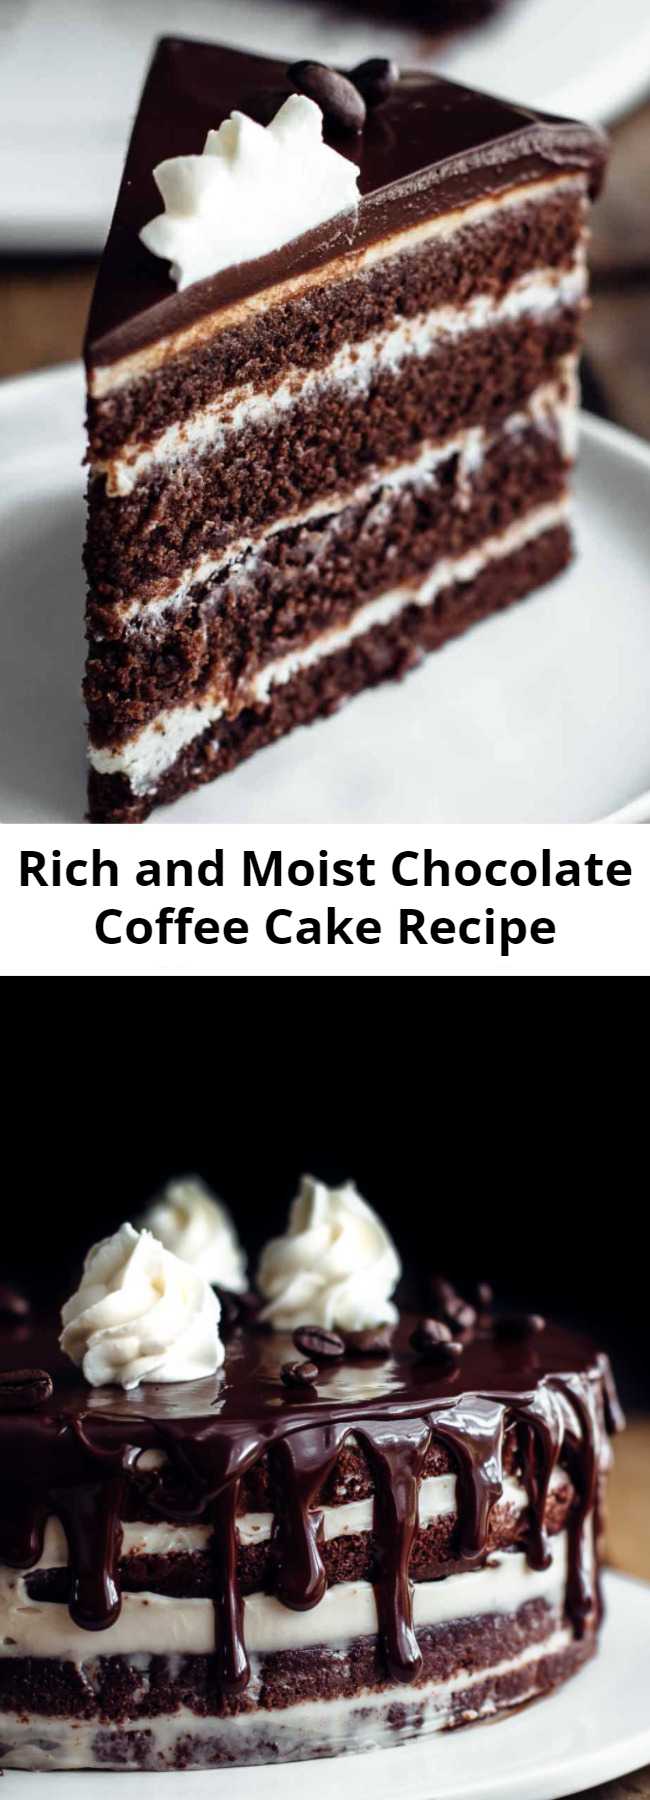 Rich and Moist Chocolate Coffee Cake Recipe - This cake is moist, rich, and creamy. Intense chocolate and coffee taste. 4 coffee-infused chocolate cake layers frosted with coffee cream frosting and topped with chocolate ganache. #baking #coffeecake #chocolate #desserts #sweets